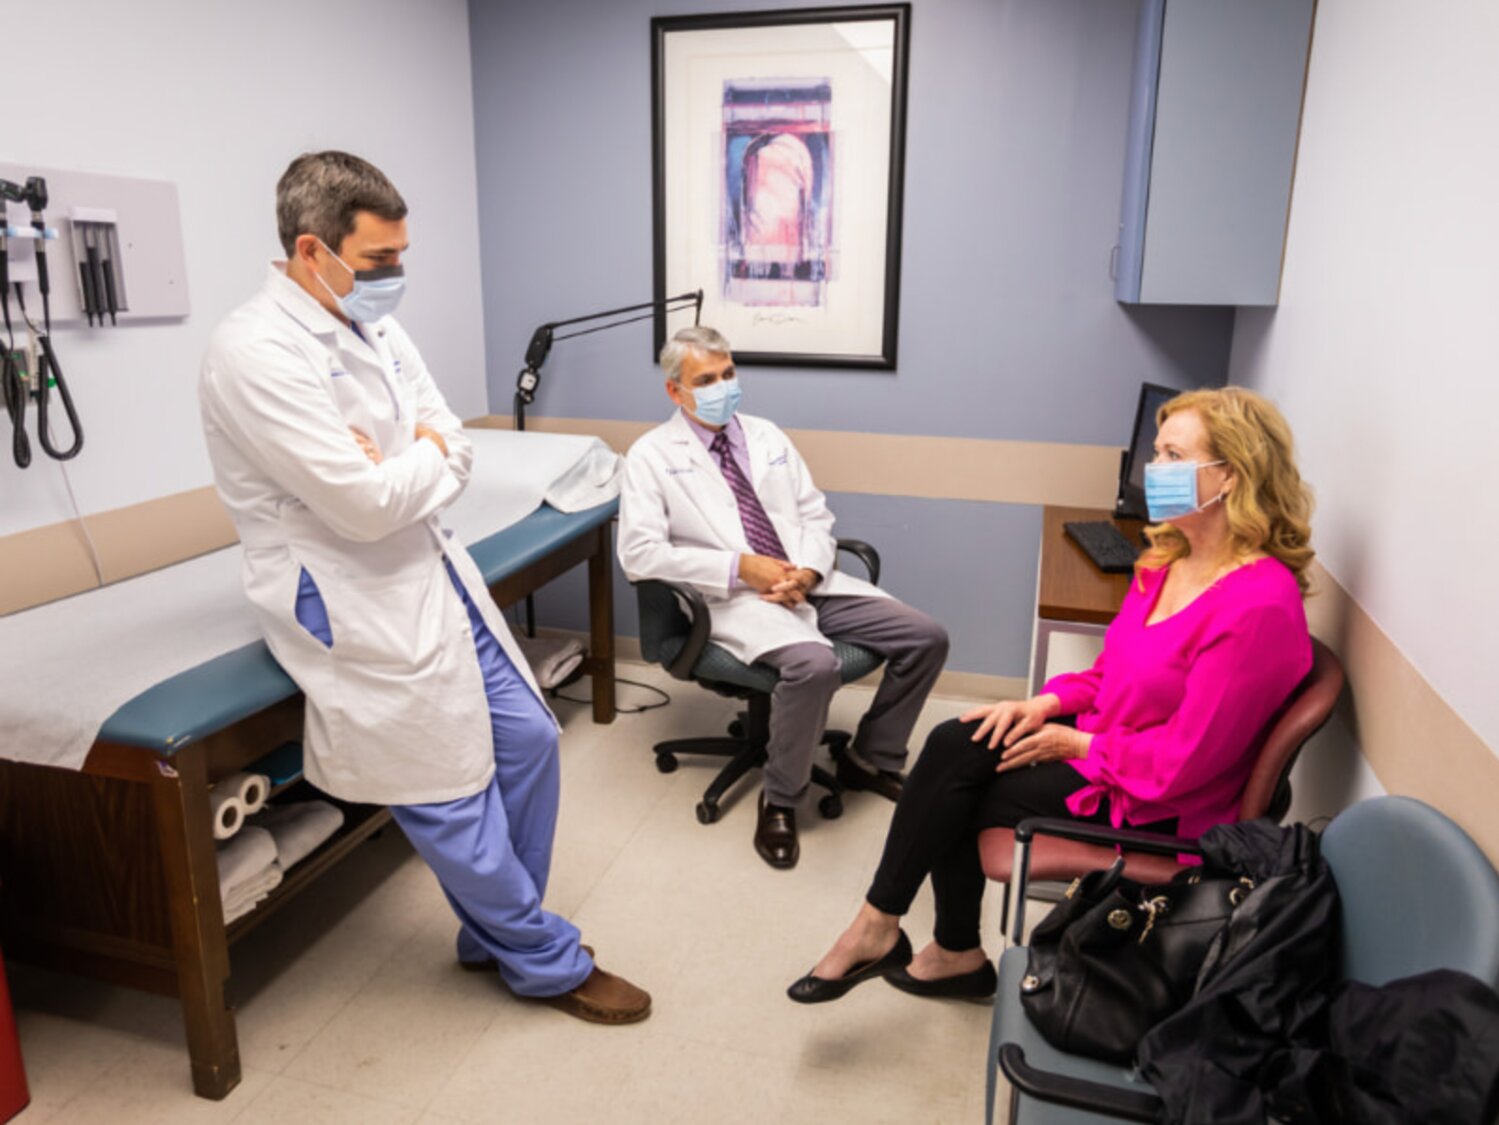 Dr. Chad Washington, left, and Dr. Shashank Shekhar chat with patient Judy Herrington during a clinic visit in 2020.